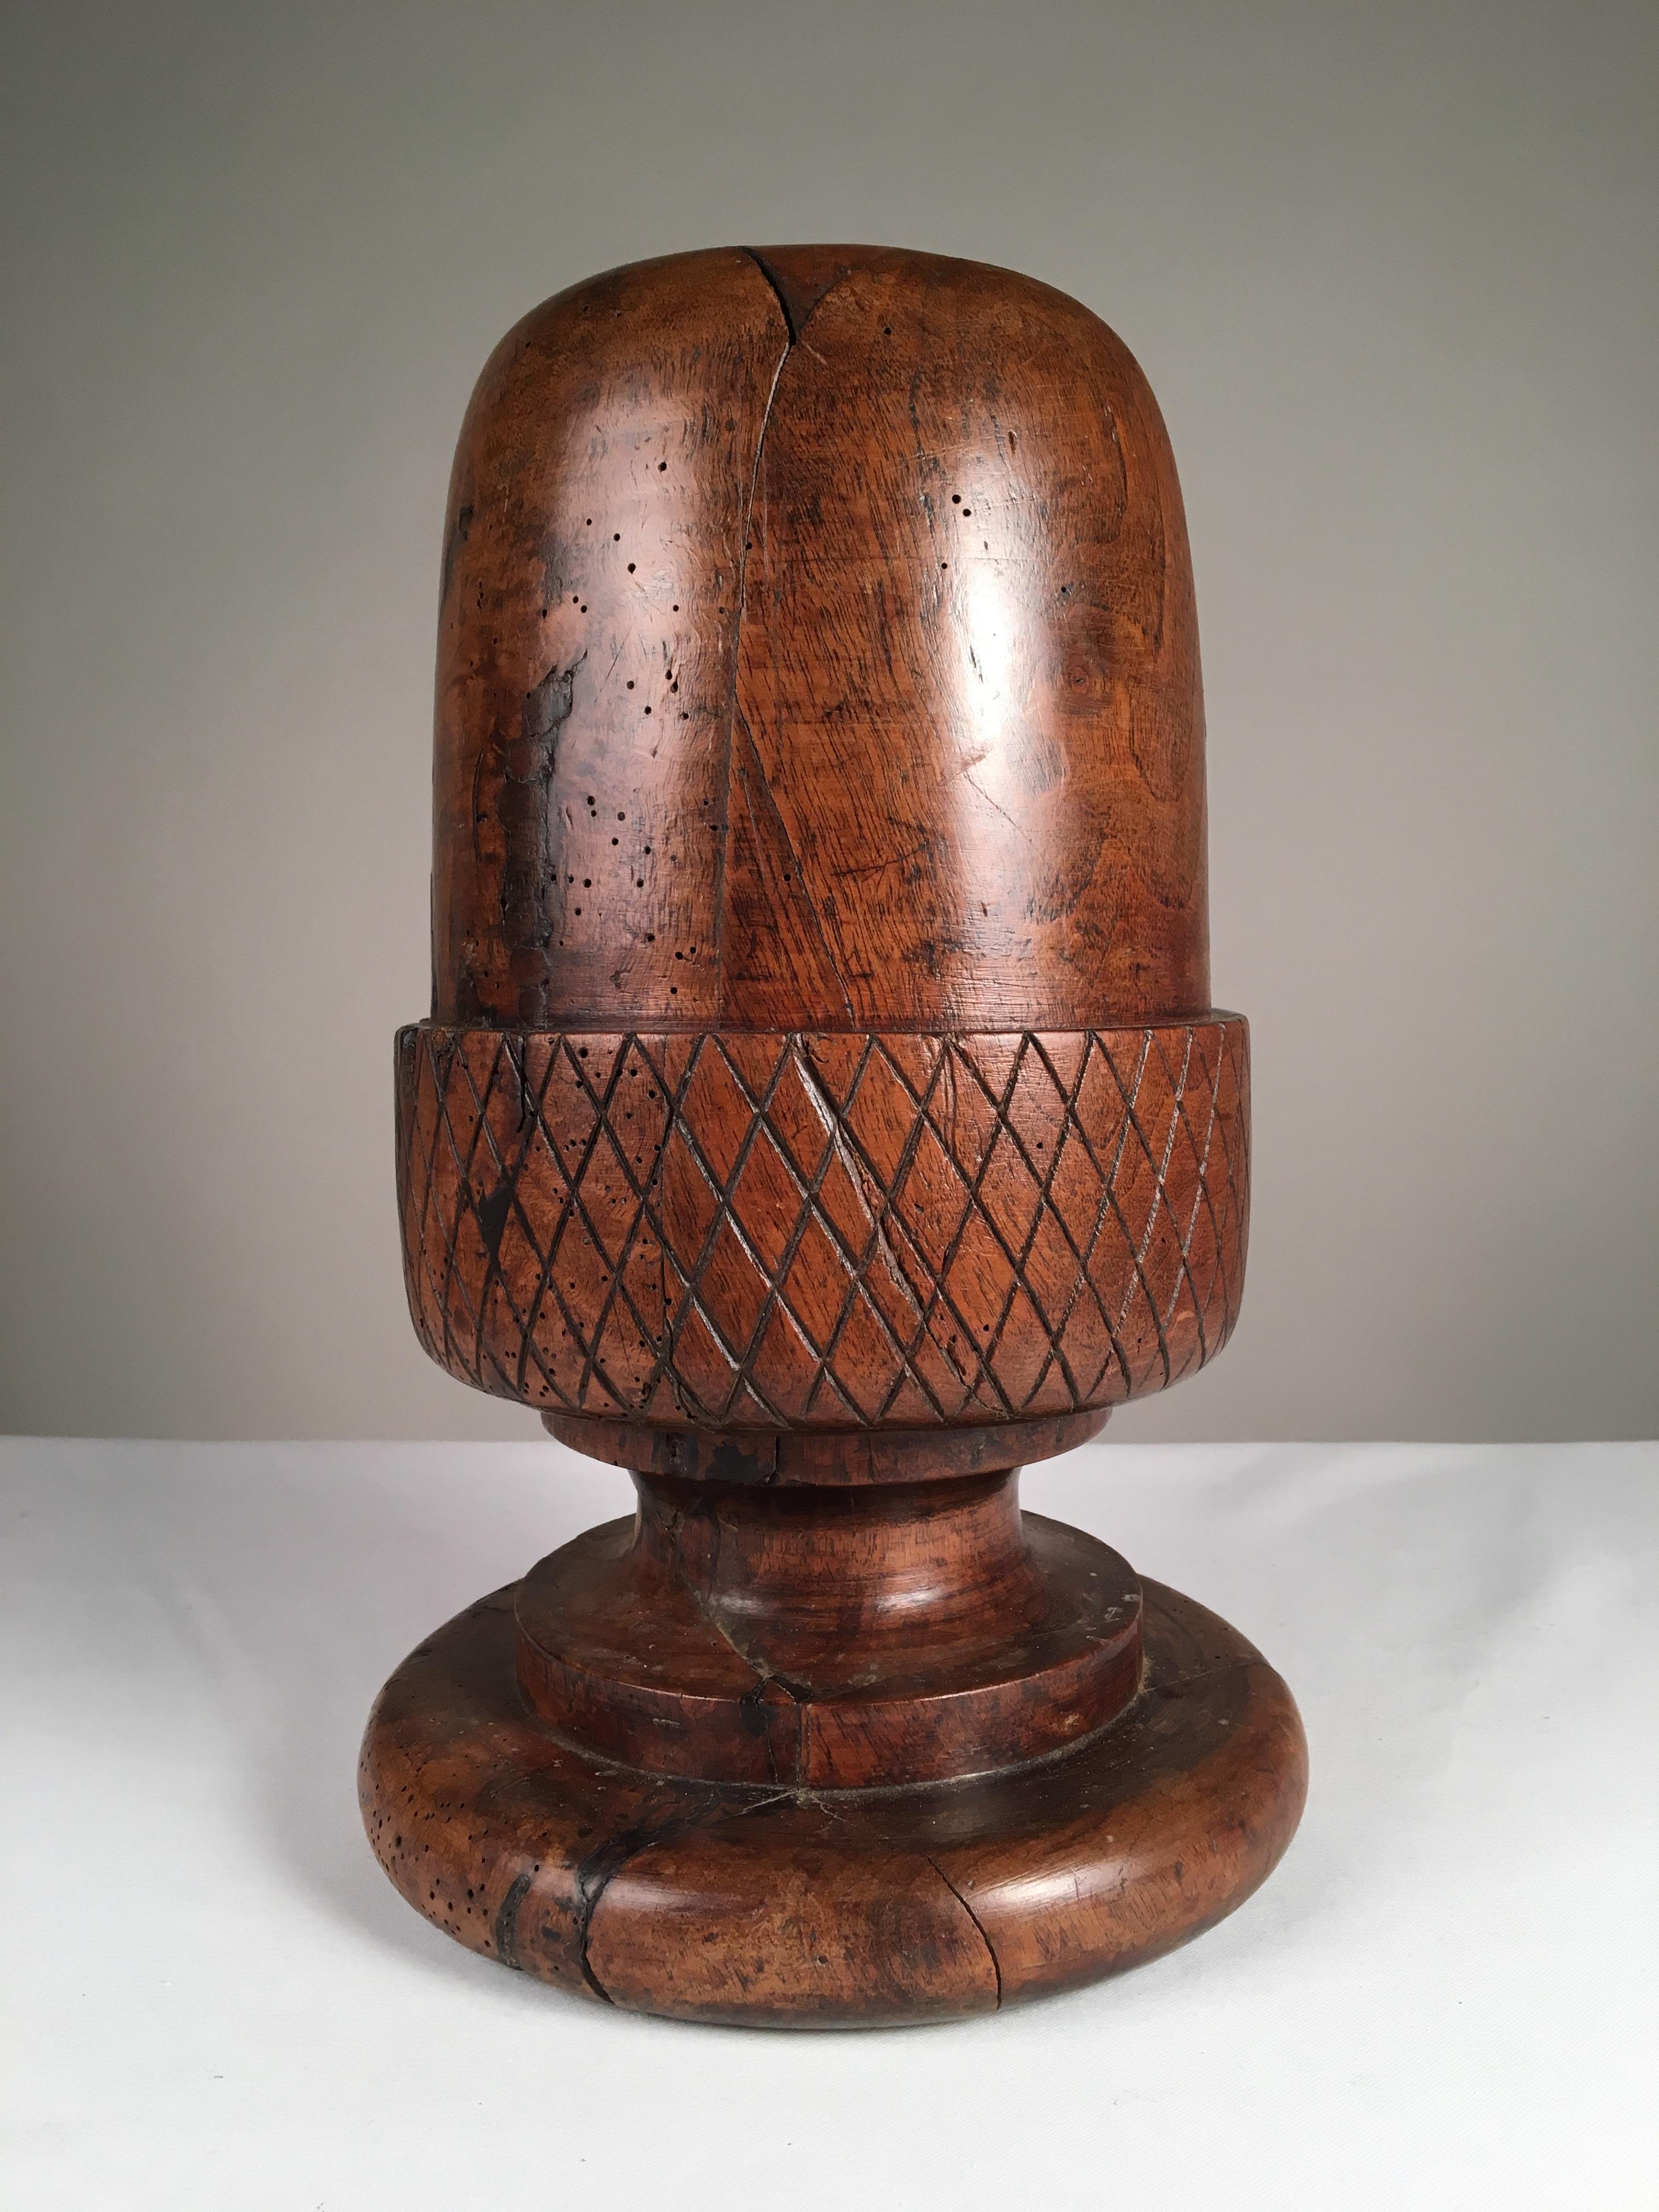 A French 18th century wig stand, acorn form in carved walnut. From the estate of Pierre Moulin, founder of the Pierre Deux shops.